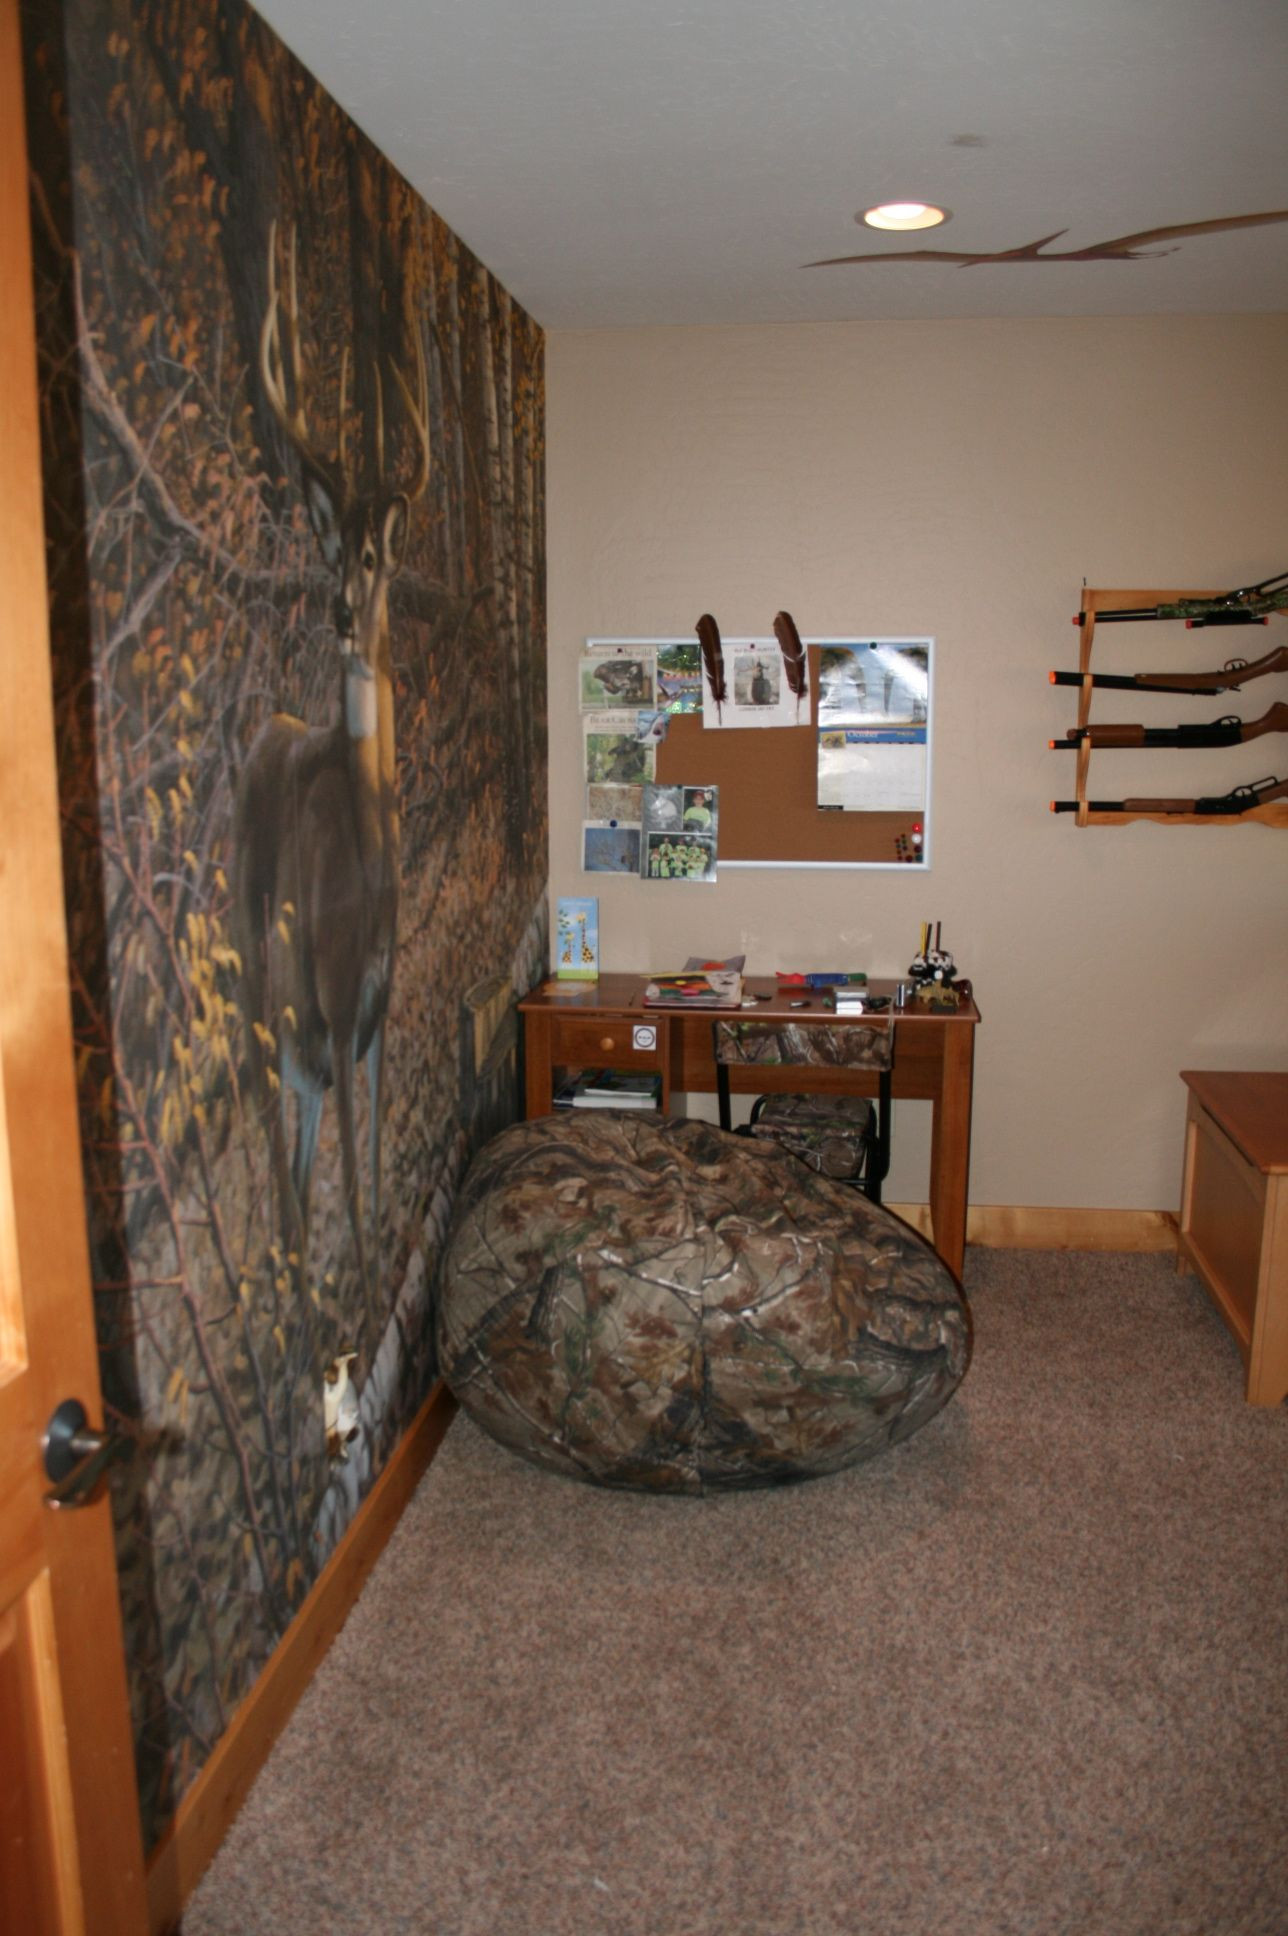 Hunting Bedroom Decor
 My son s new hunting themed room